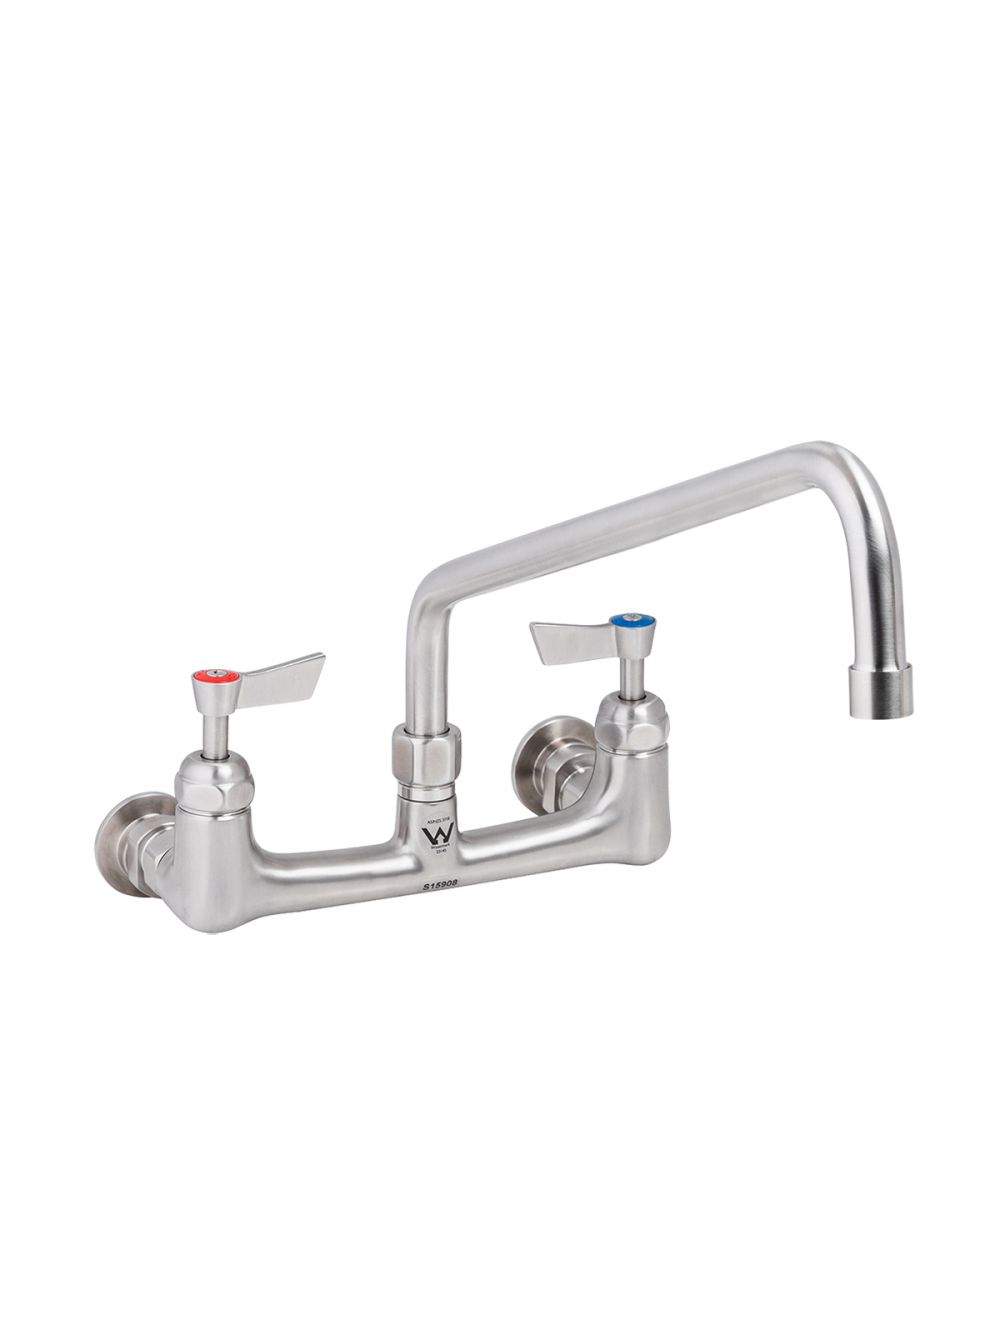 Stainless Steel Exposed Wall Tap Body and Spout